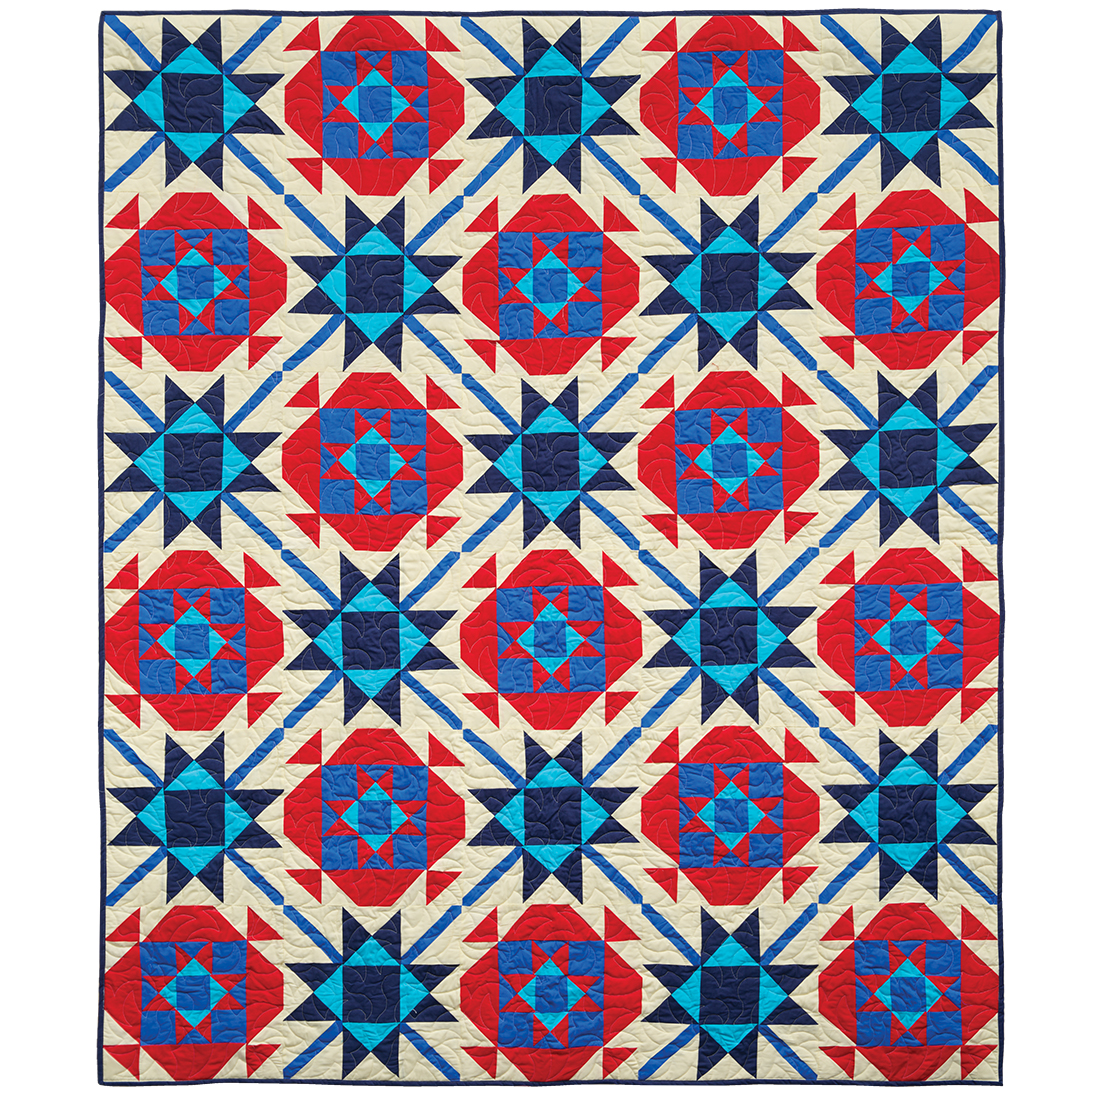 Fireworks patriotic red, white, and blue quilt with alternating blocks by Charisma Horton.